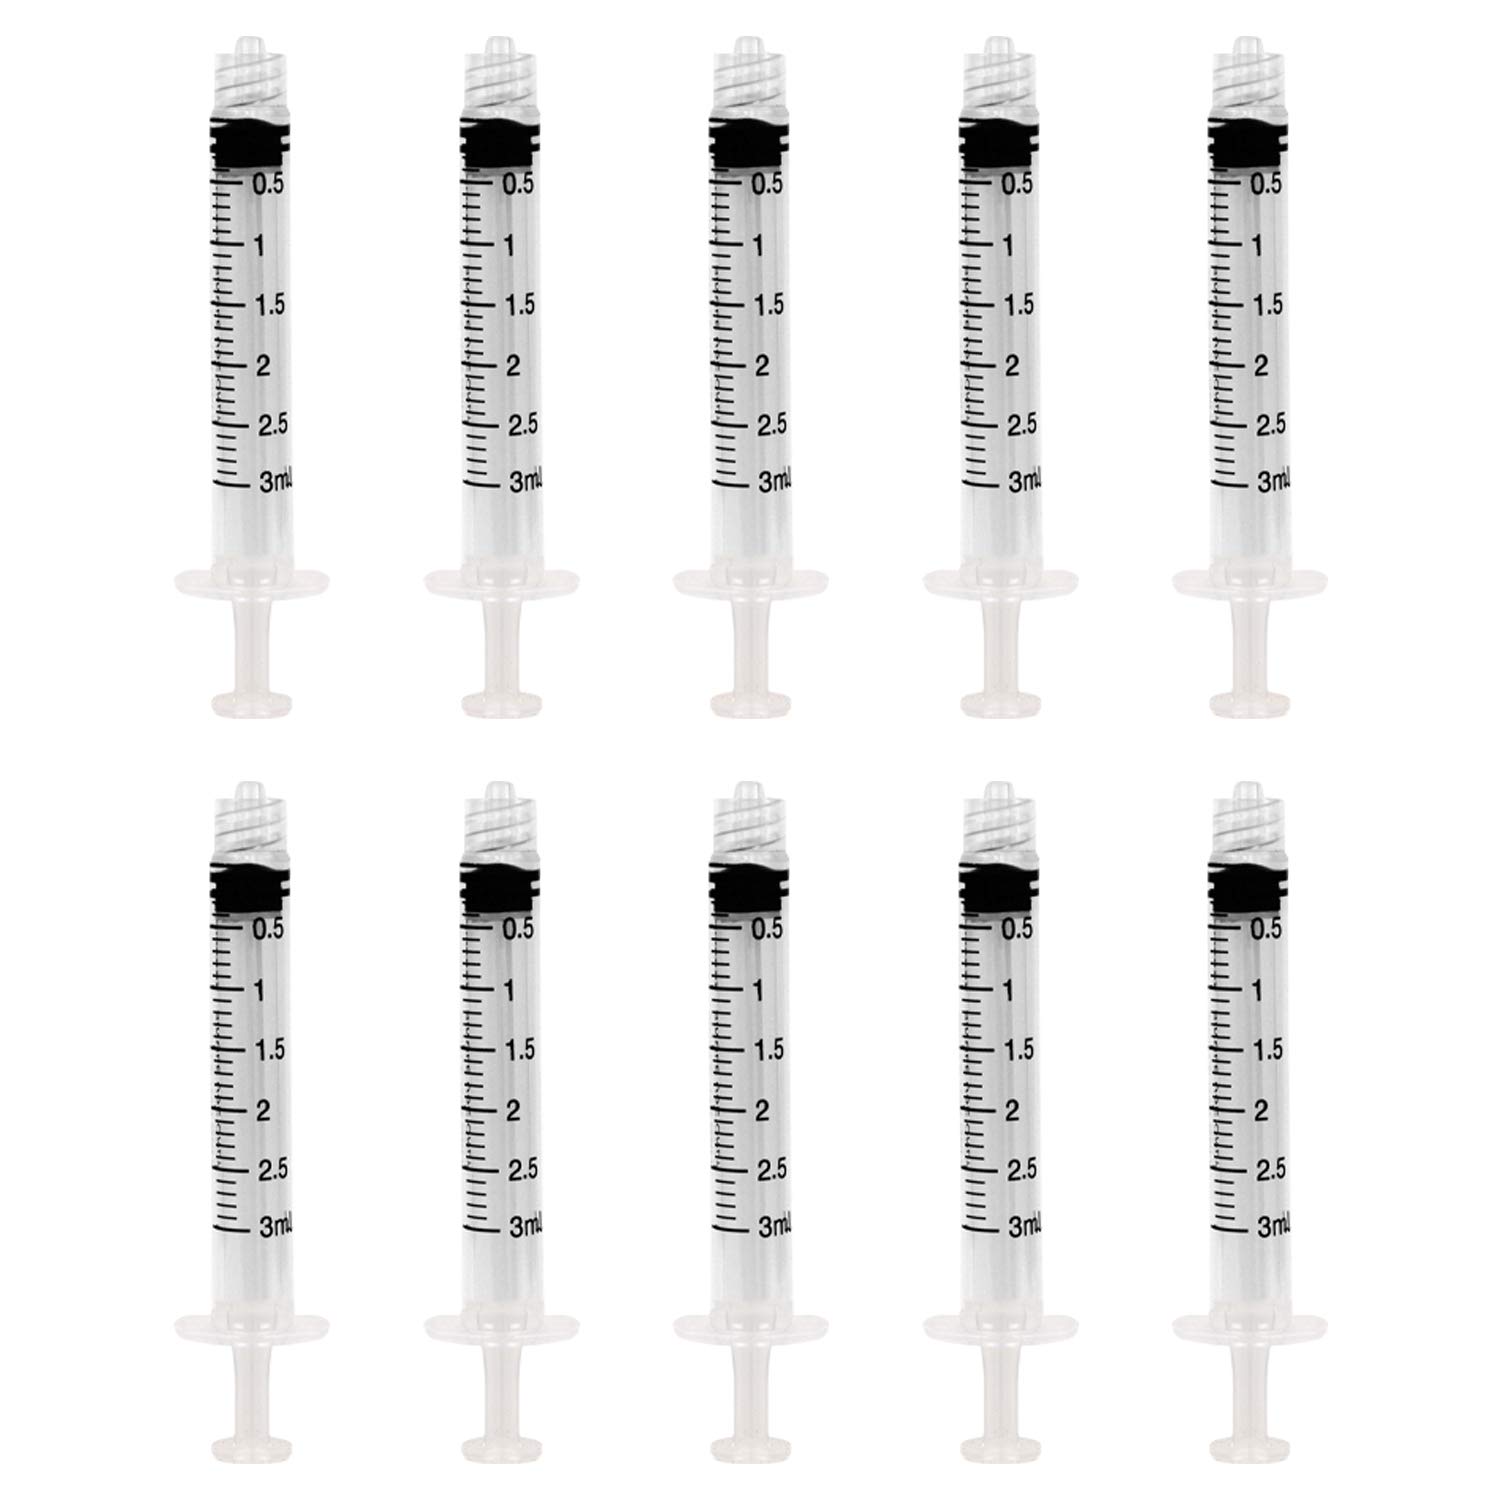 3ml Syringe Sterile with Luer Lock Tip - No Needle - Individually